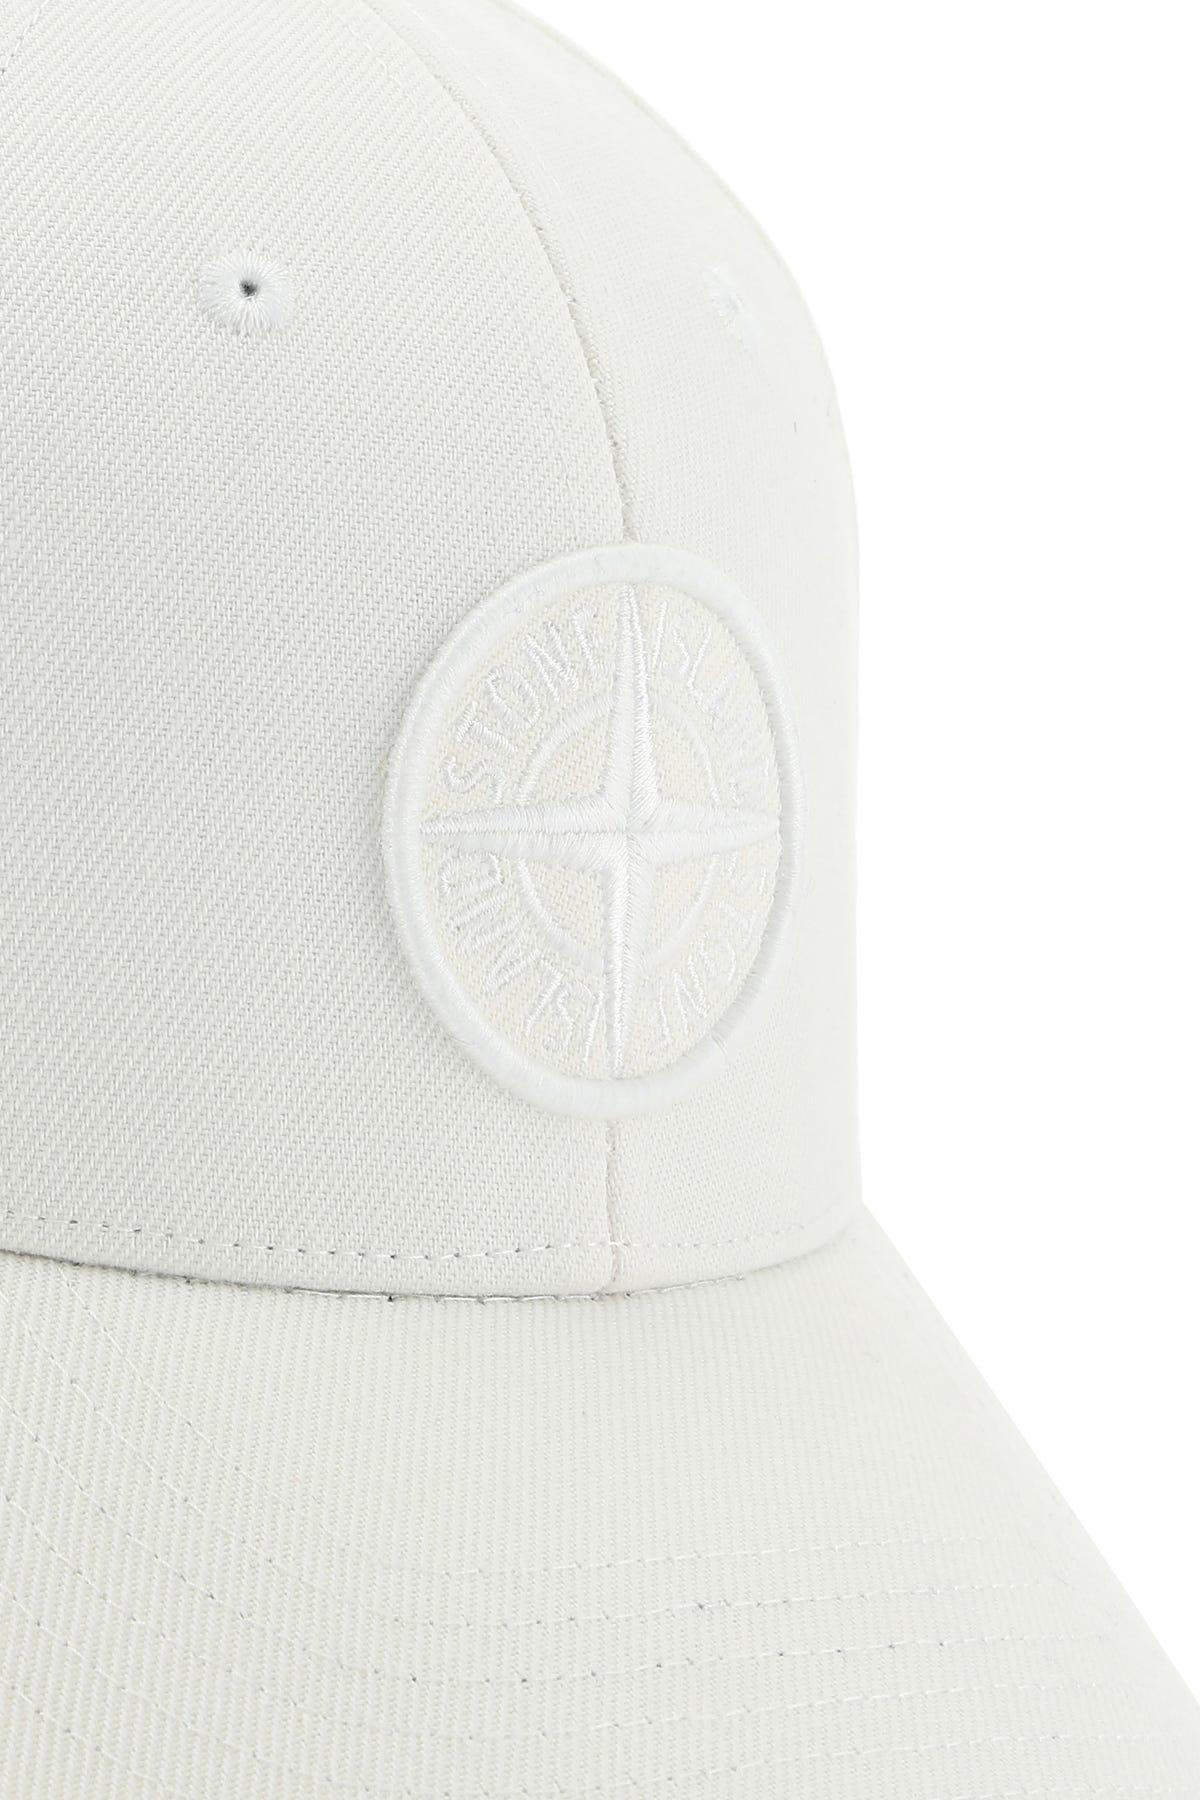 Stone Island Synthetic Acrylic Ble in White for Men - Save 38% | Lyst